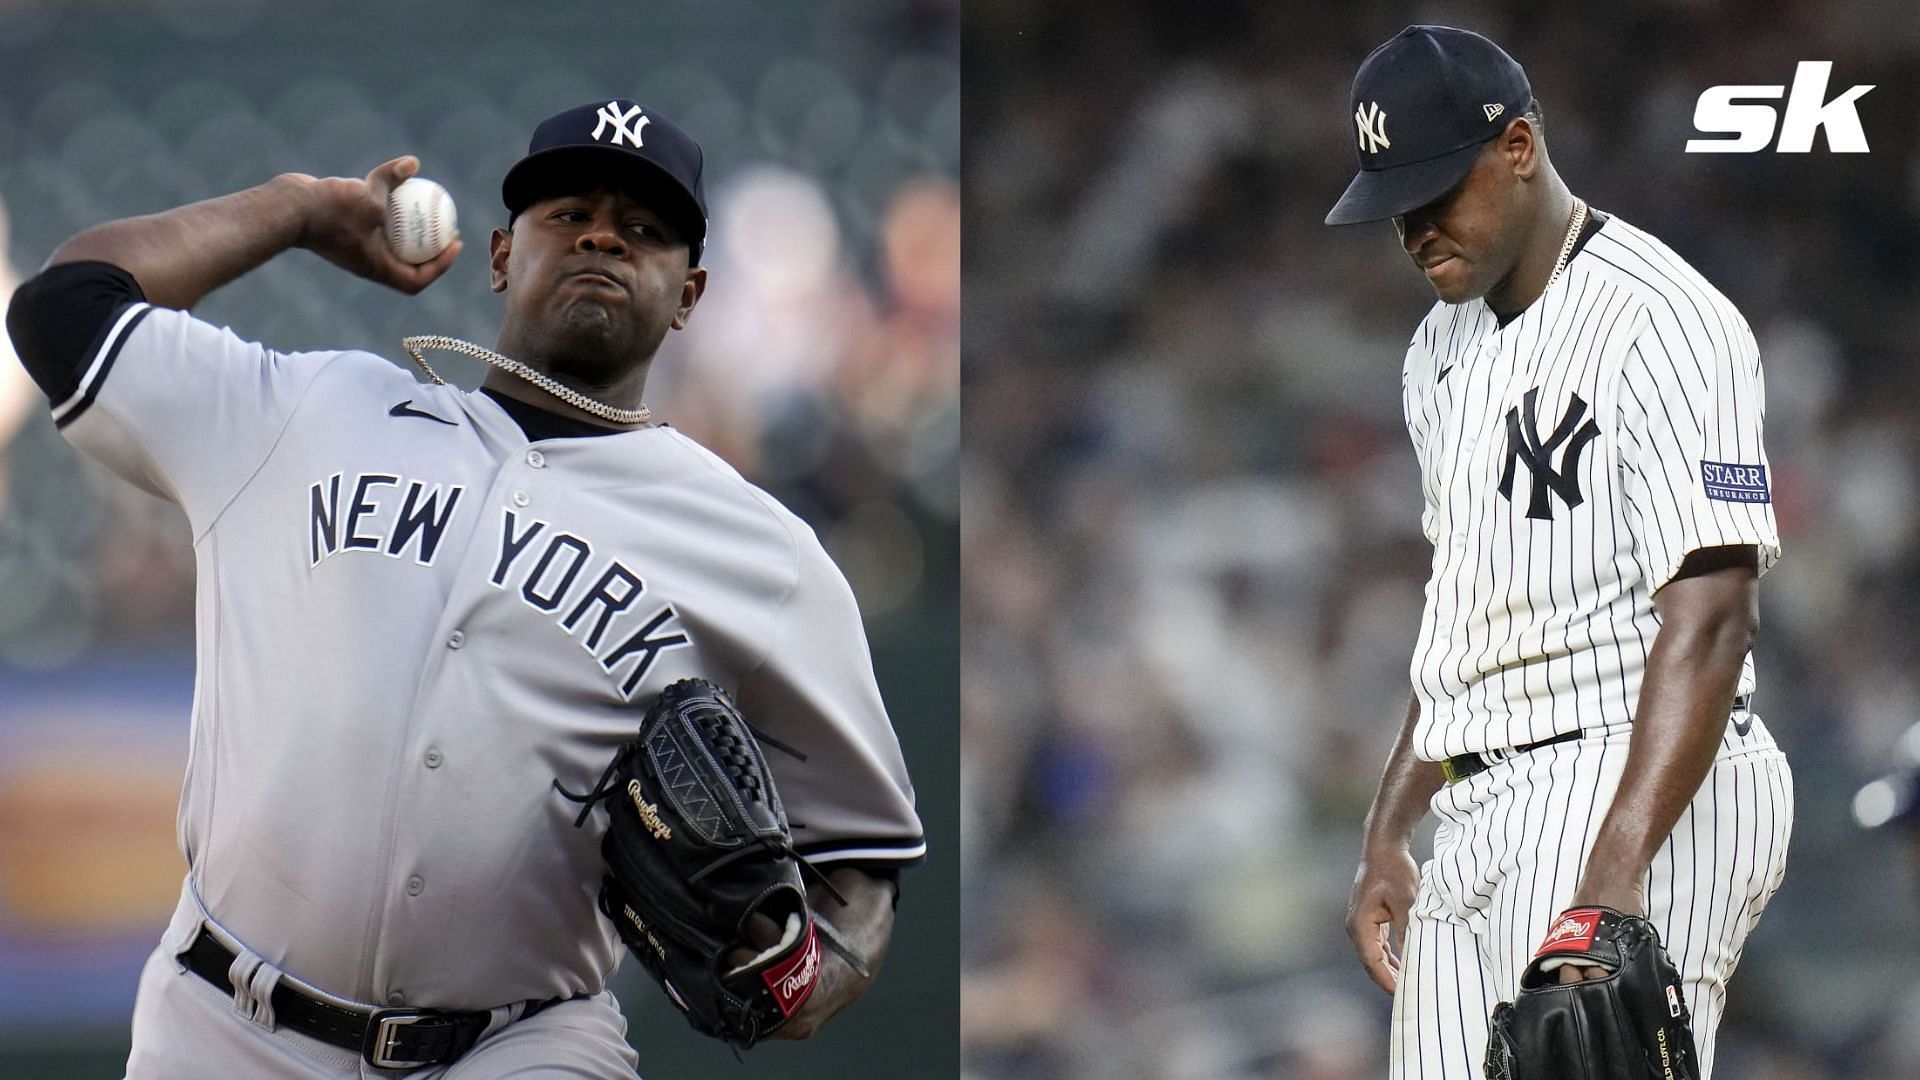 The New York Mets have signed veteran pitcher Luis Severino to a one-year contract